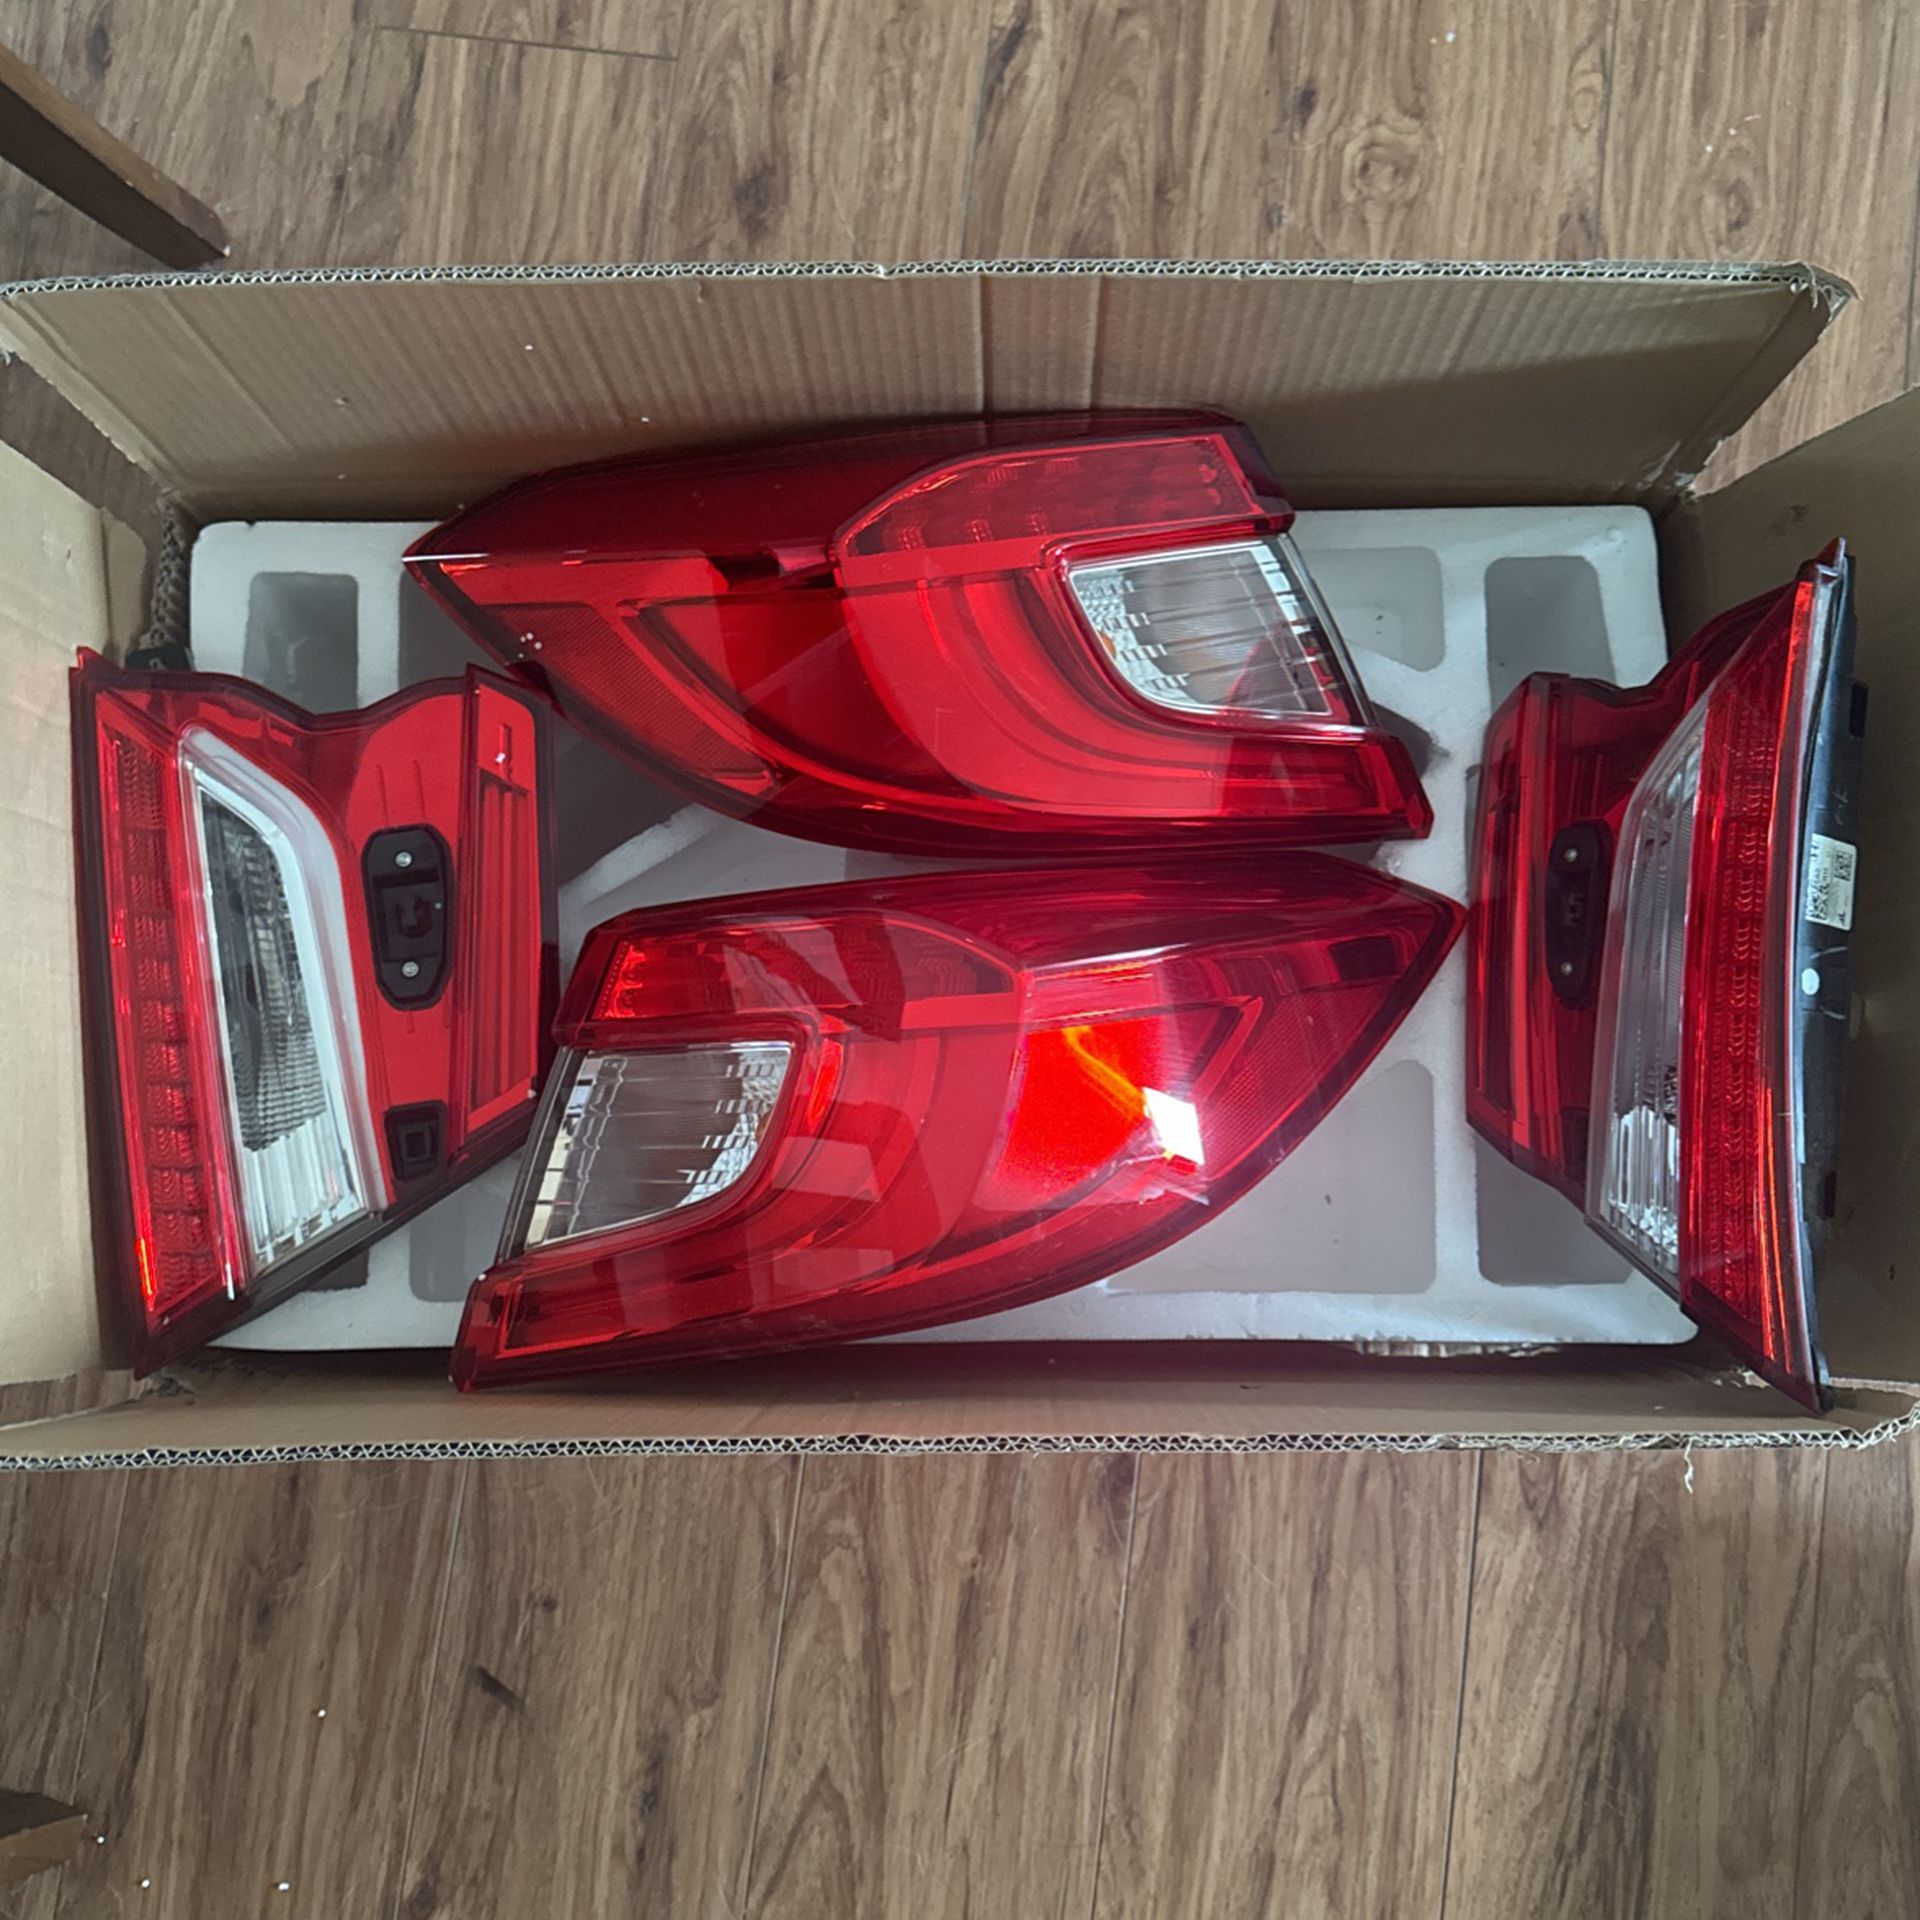  Honda Accord Tail lights OEM (costed 500 Just For One Side Off The Dealership)